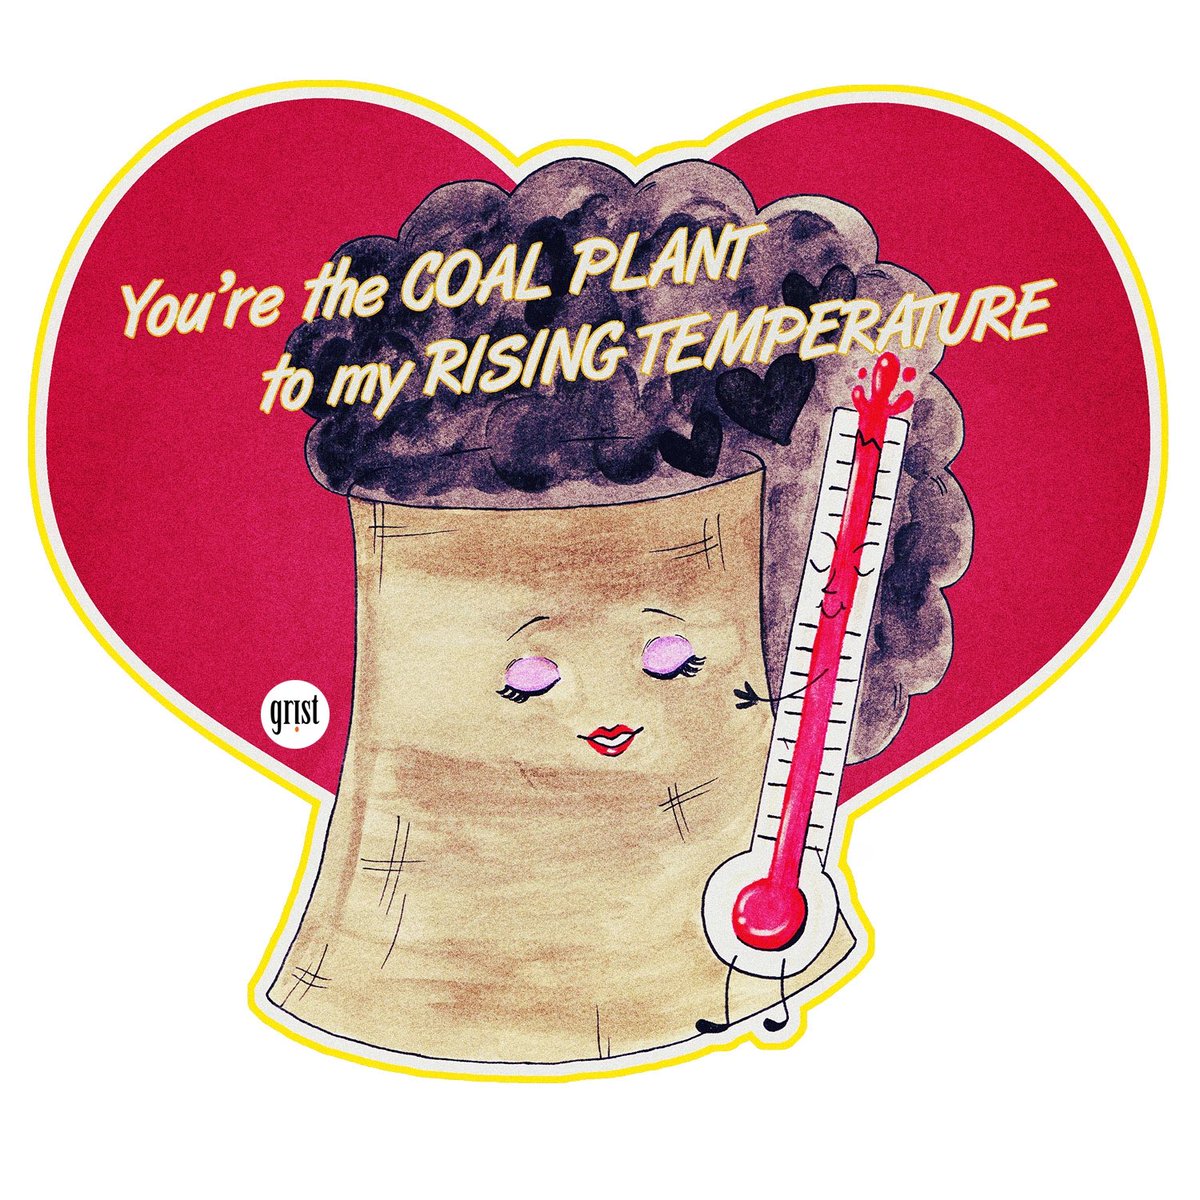 Happy Valentine’s Day!! (Compost your roses)